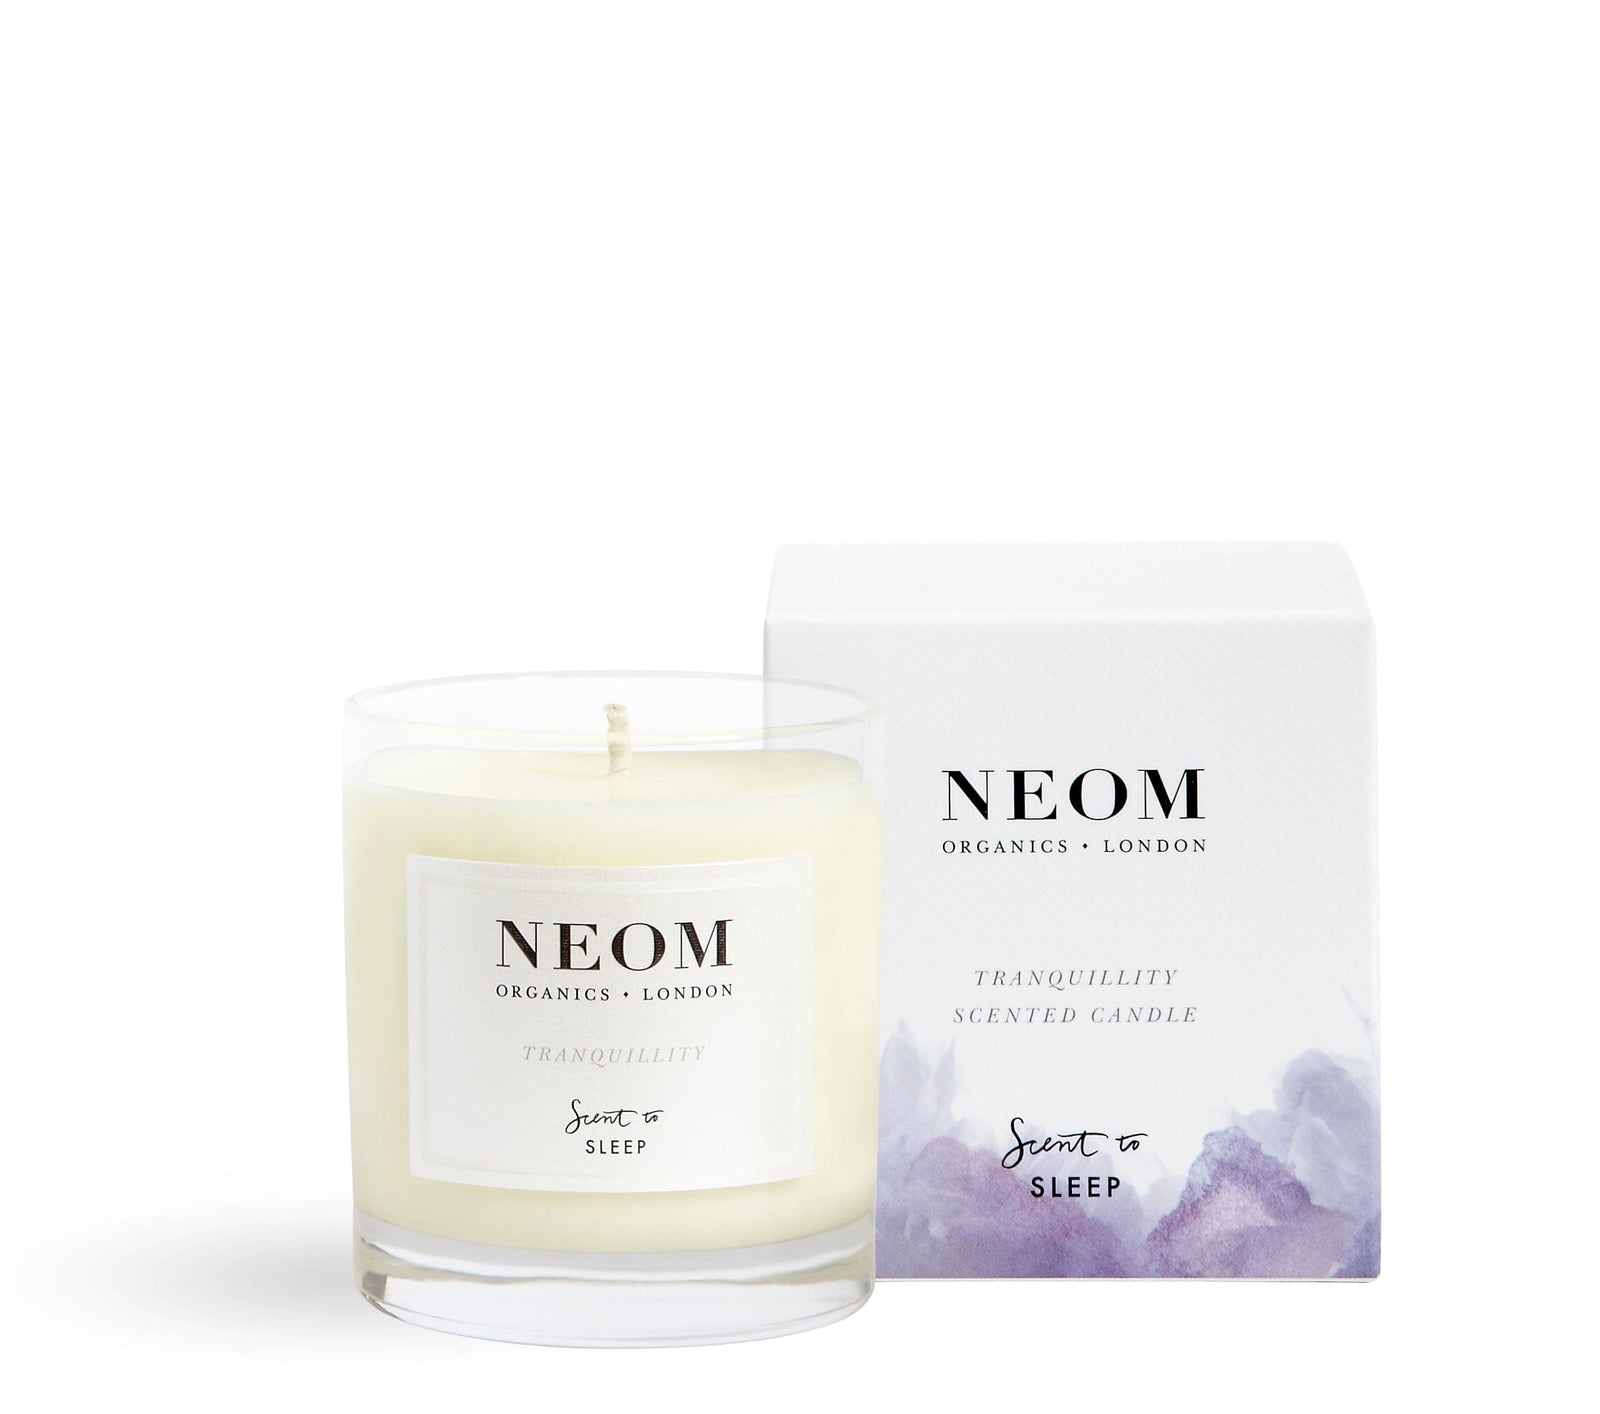 NEOM Tranquillity Scented Candle Scent to Sleep (1 wick)